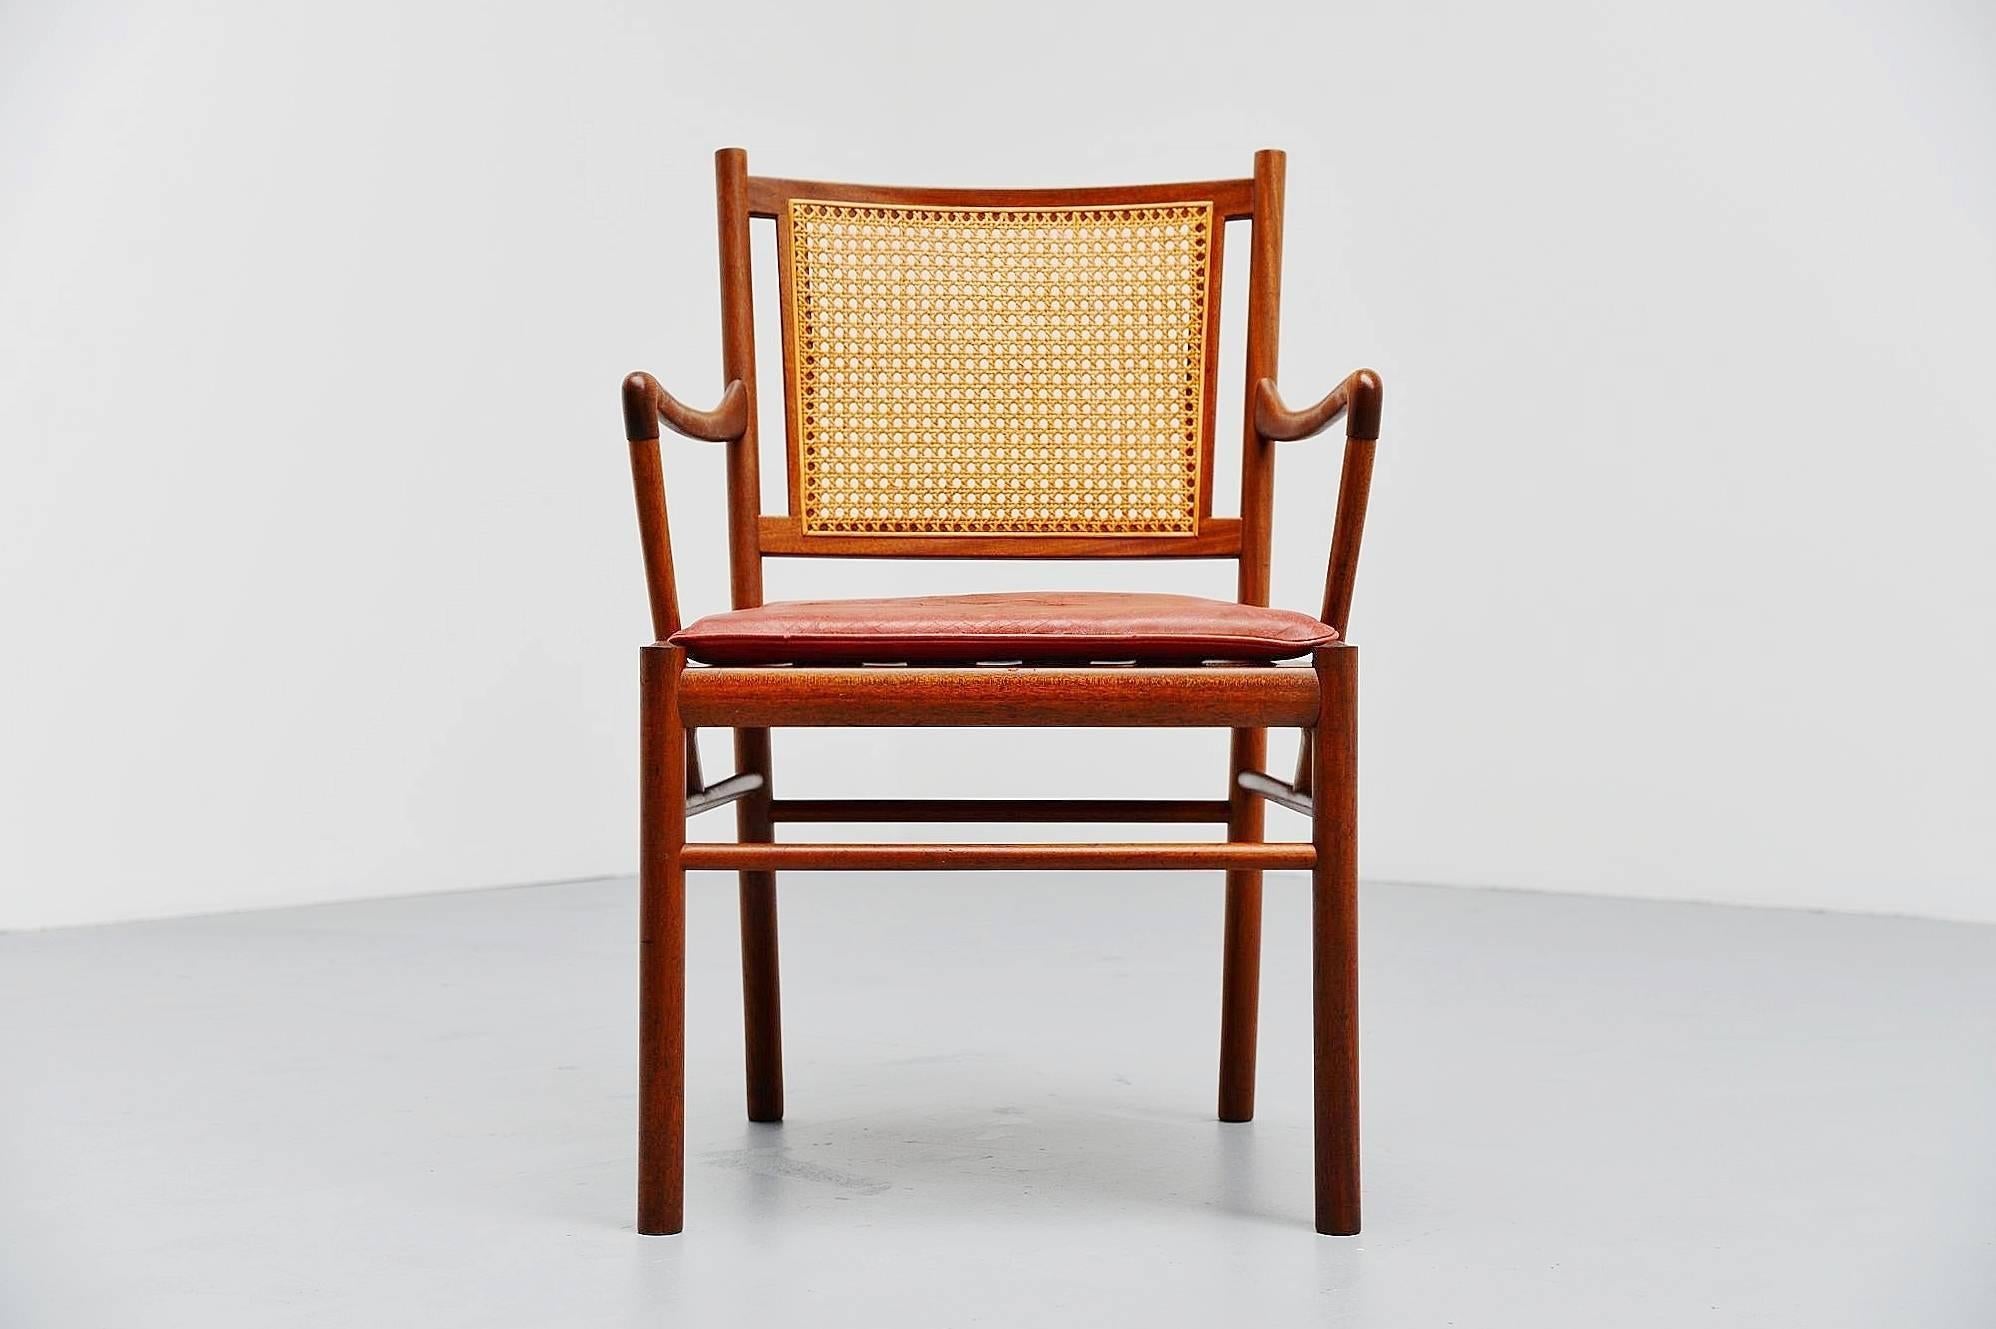 Very nice Colonial armchair designed by Ole Wanscher, produced by Poul Jeppesens, Denmark, 1960. The chair has a solid teak wooden frame and a cane back. It still has its original red leather seat which has a nice patina to it and some craquele (see